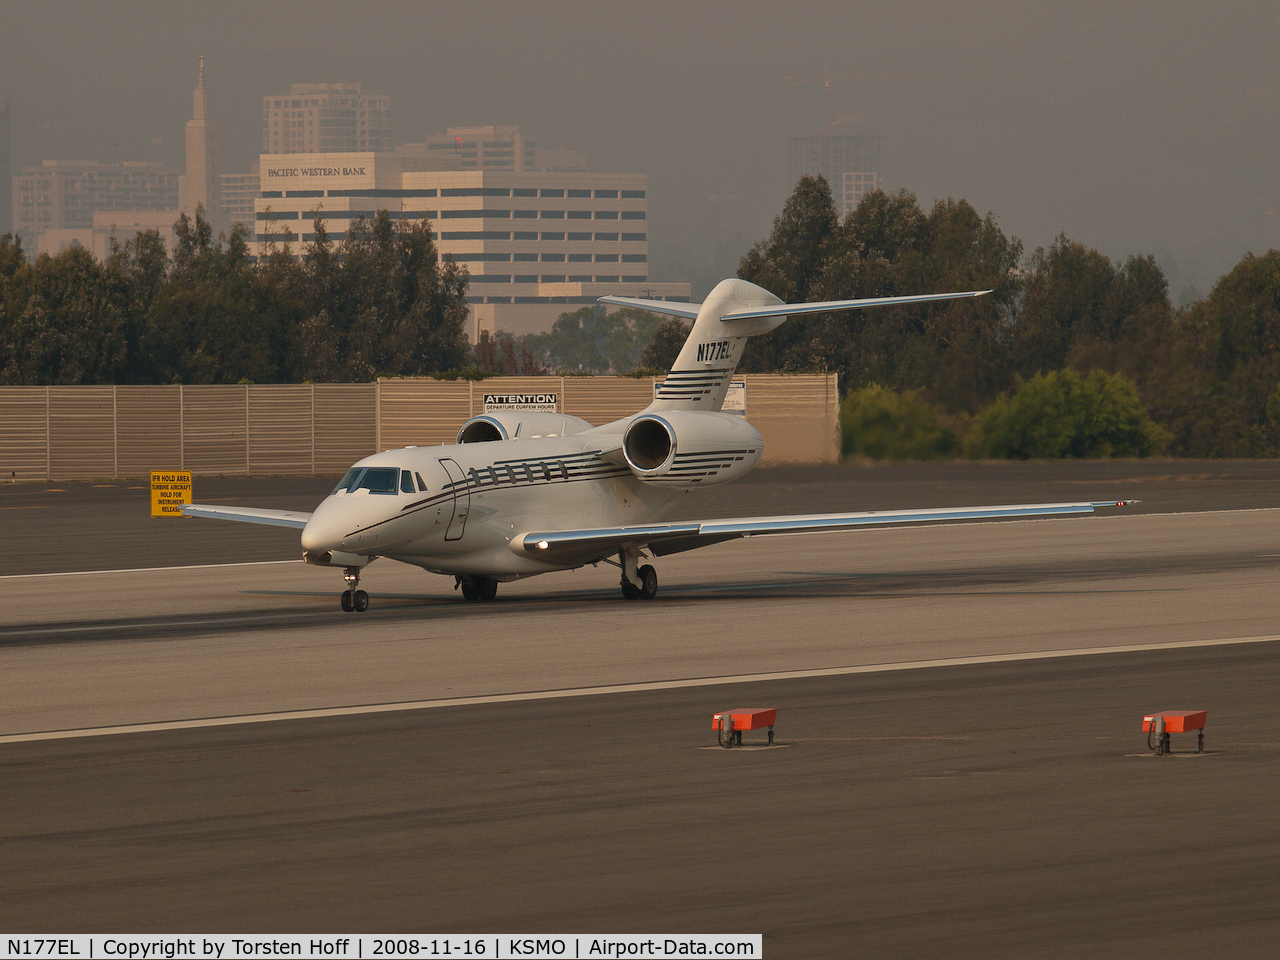 N177EL, 2002 Cessna 750 Citation X C/N 750-0177, N177EL departing from RWY 21 into a sky full of smoke from wildfires.